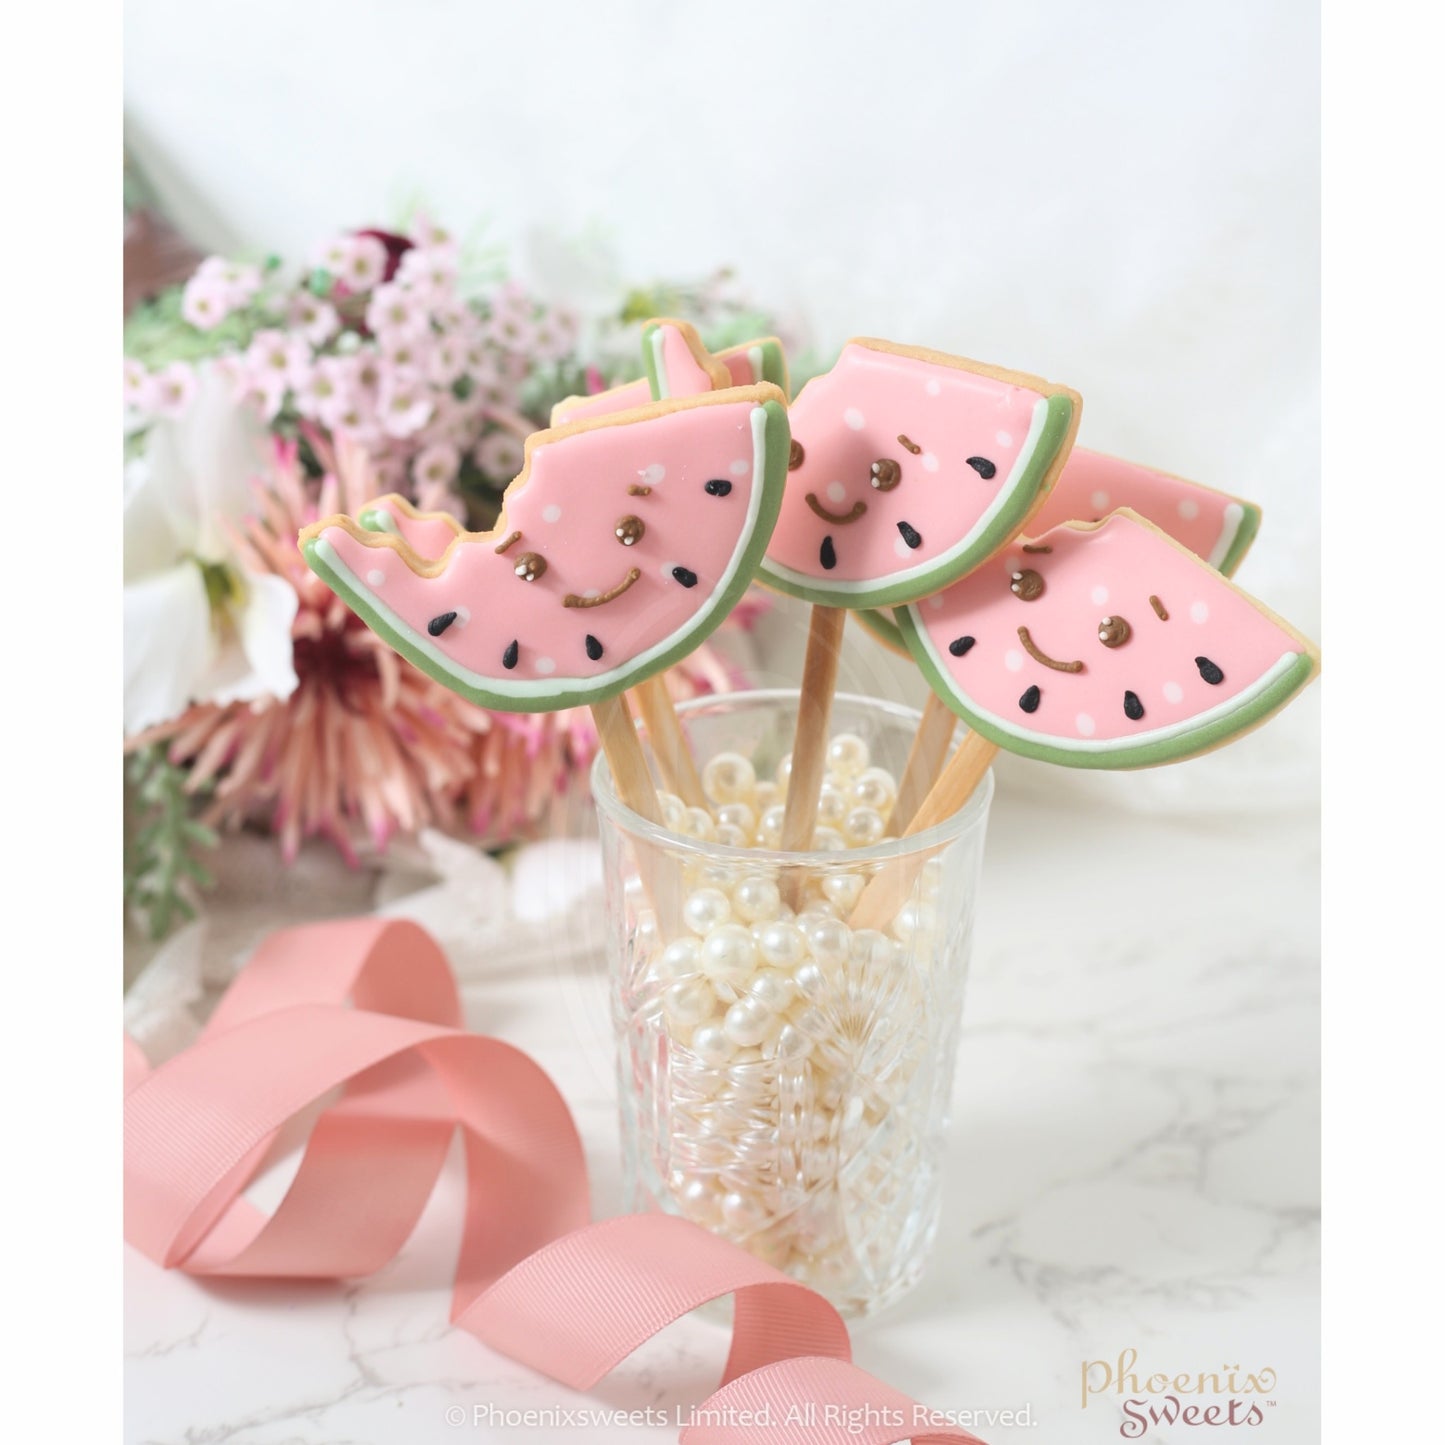 Cookie - 'Watermelon' on a Stick